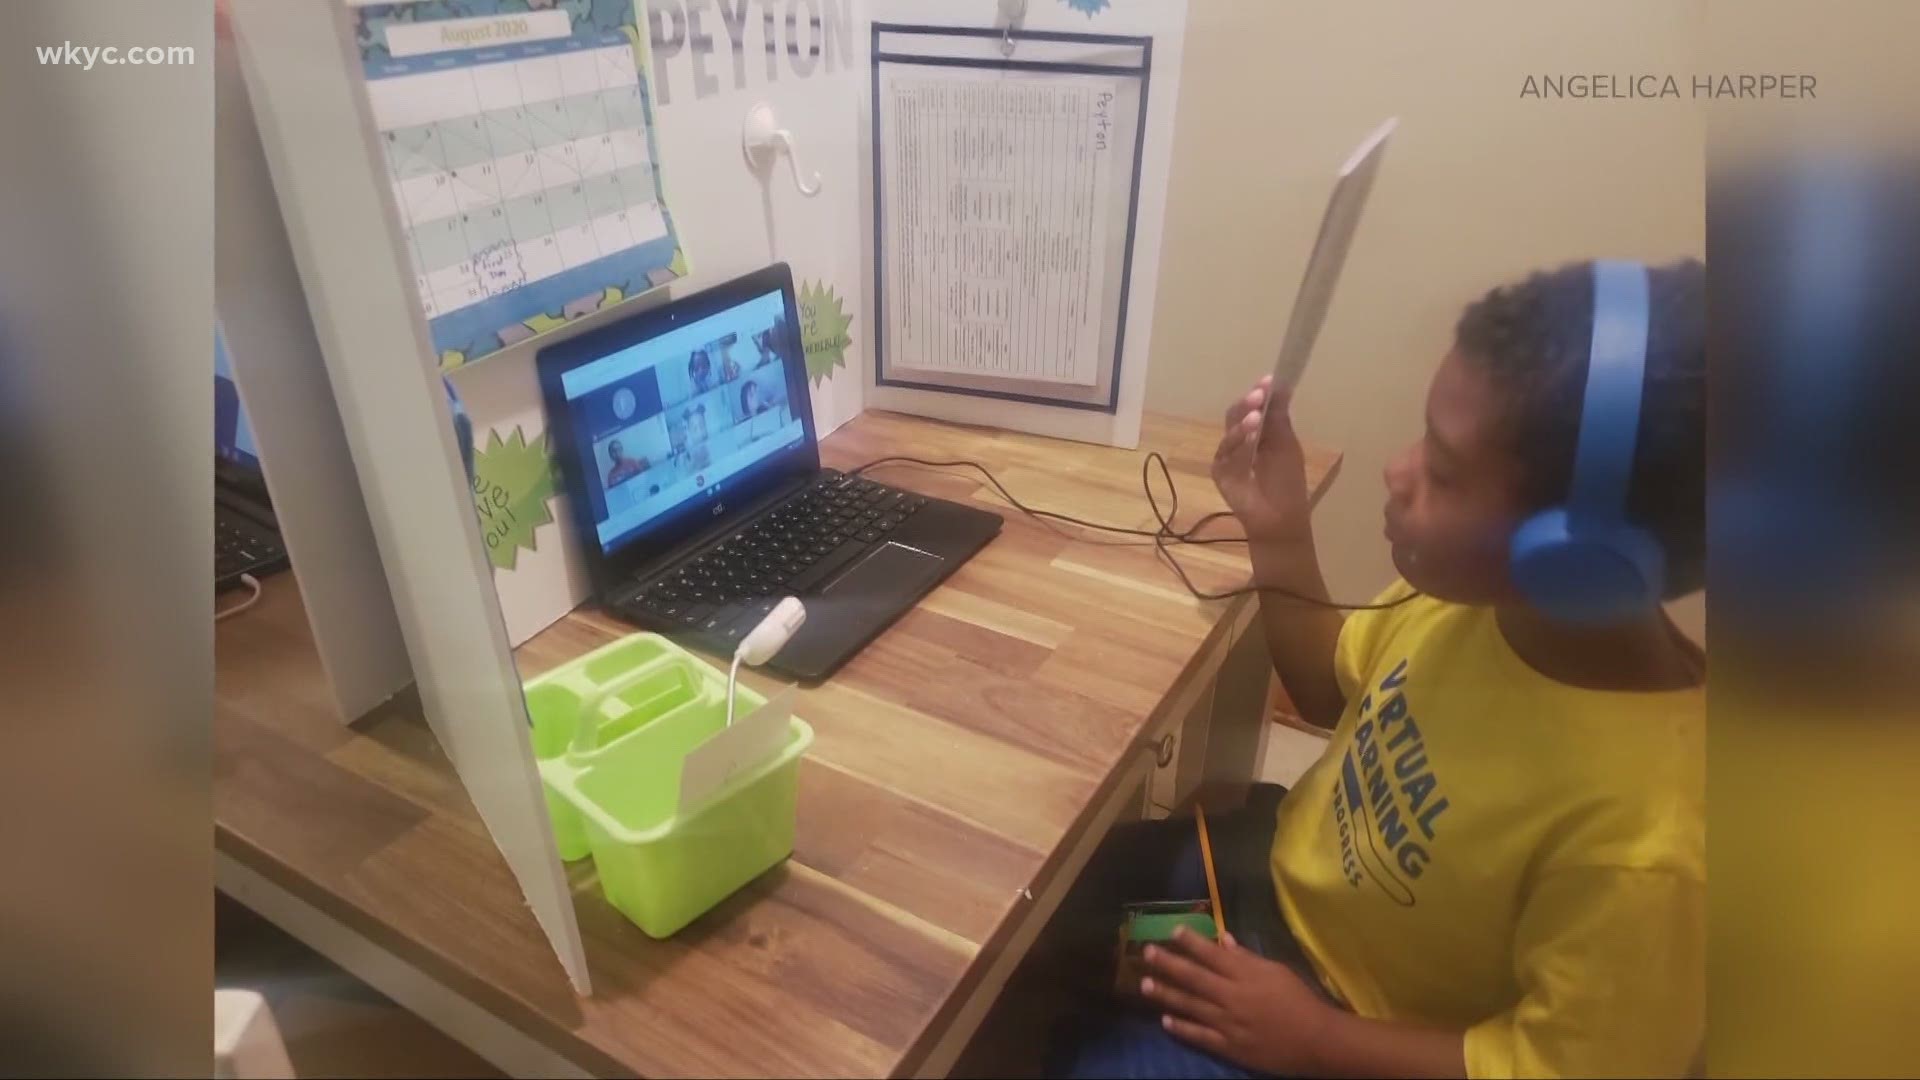 Sept. 17, 2020: Angelica Harper created dividers so her first grade twins could have individual work spaces. It was a solution to help them with distance learning.